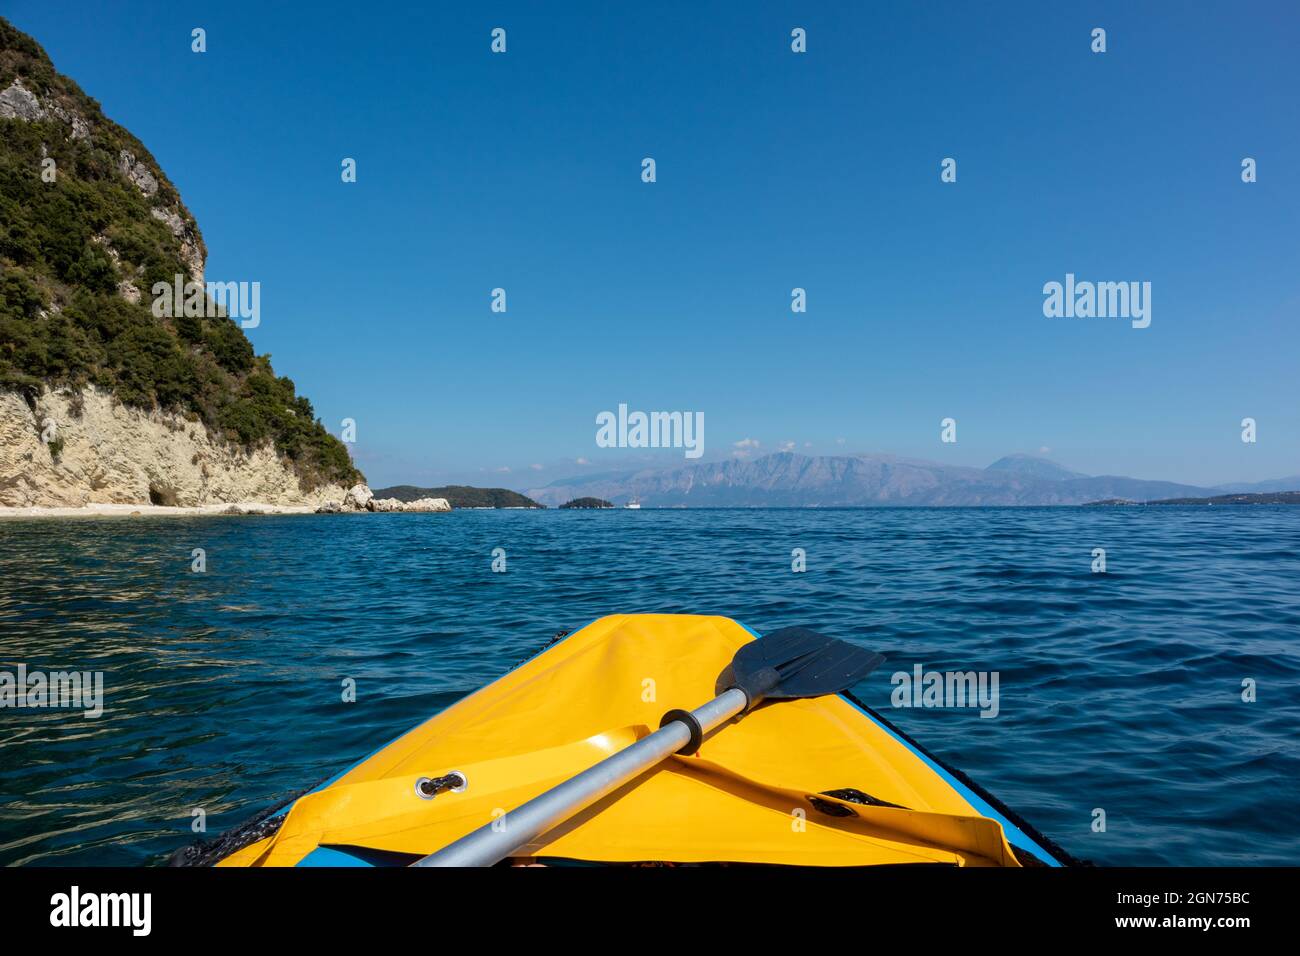 Yellow raft boat and paddle on blue clear calm Ionian Sea bay, view from boat. Nice clouds reflection and scenic rocky cliffs coast. Lefkada island in Stock Photo